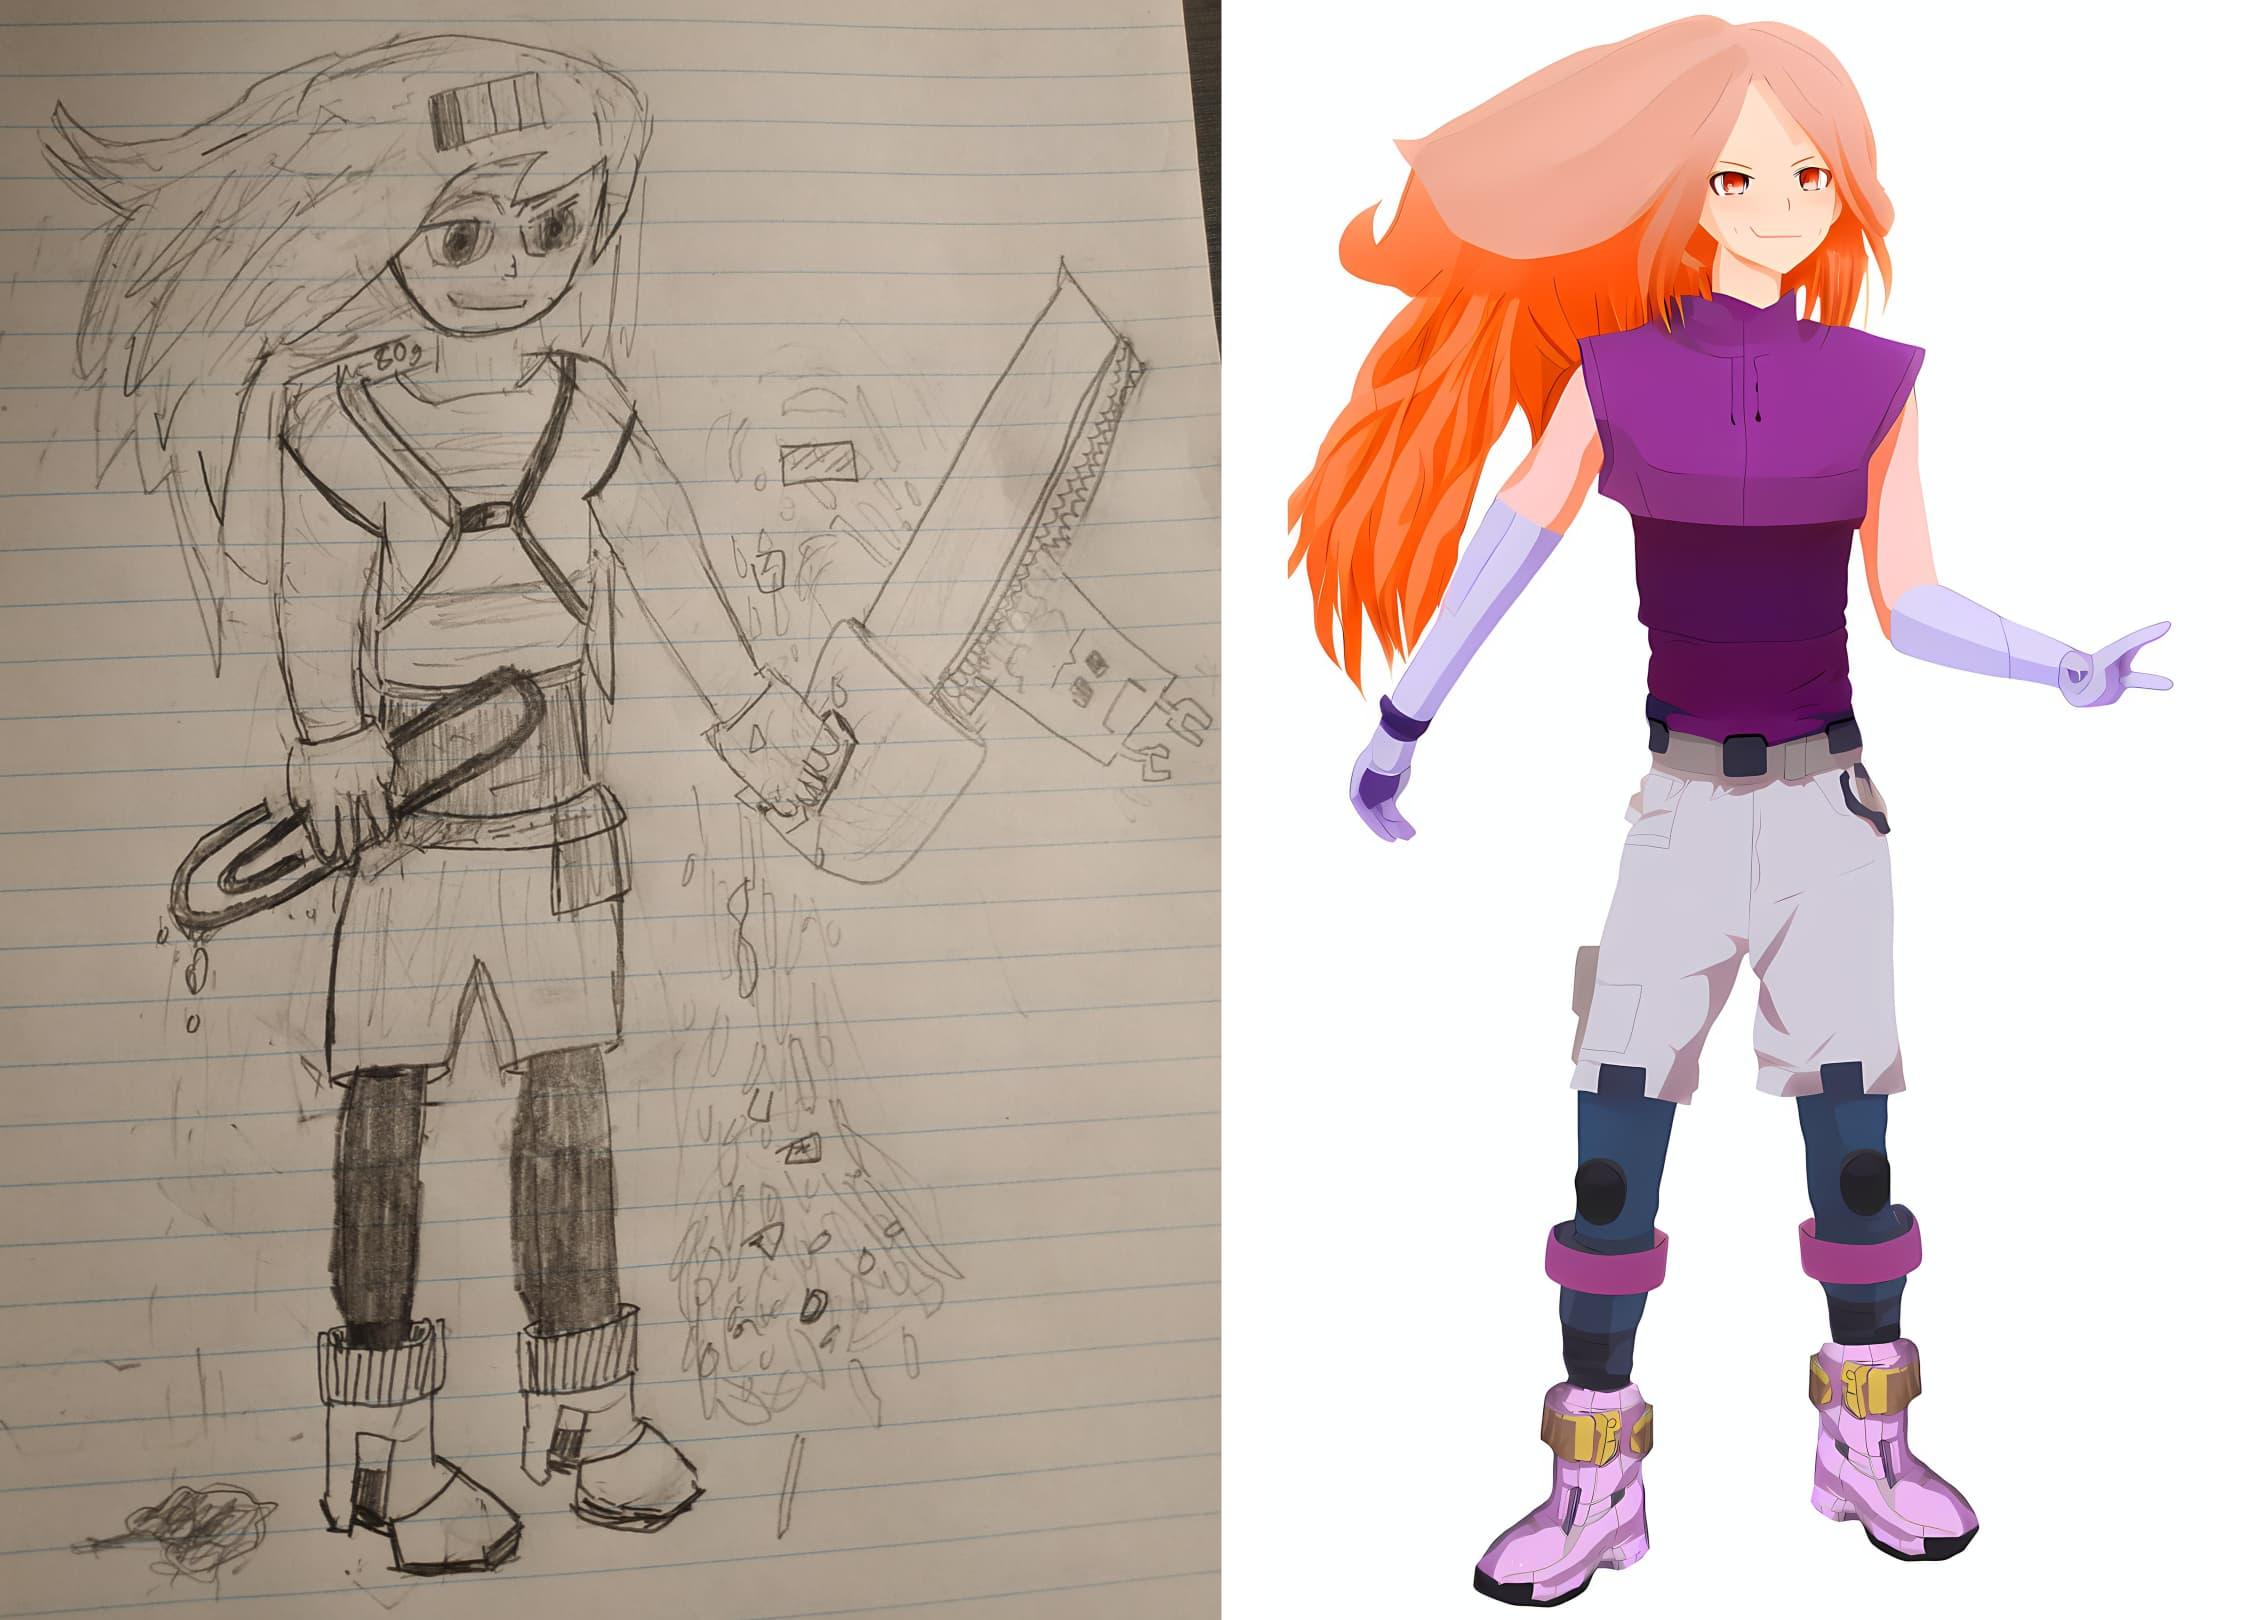 A pencil sketch of a long-haired girl wearing a t-shirt, gloves, shorts, and boots, holding a large paperclip and a paper shredder chainsaw, beside the coloured AI-generated image of Magenta from above